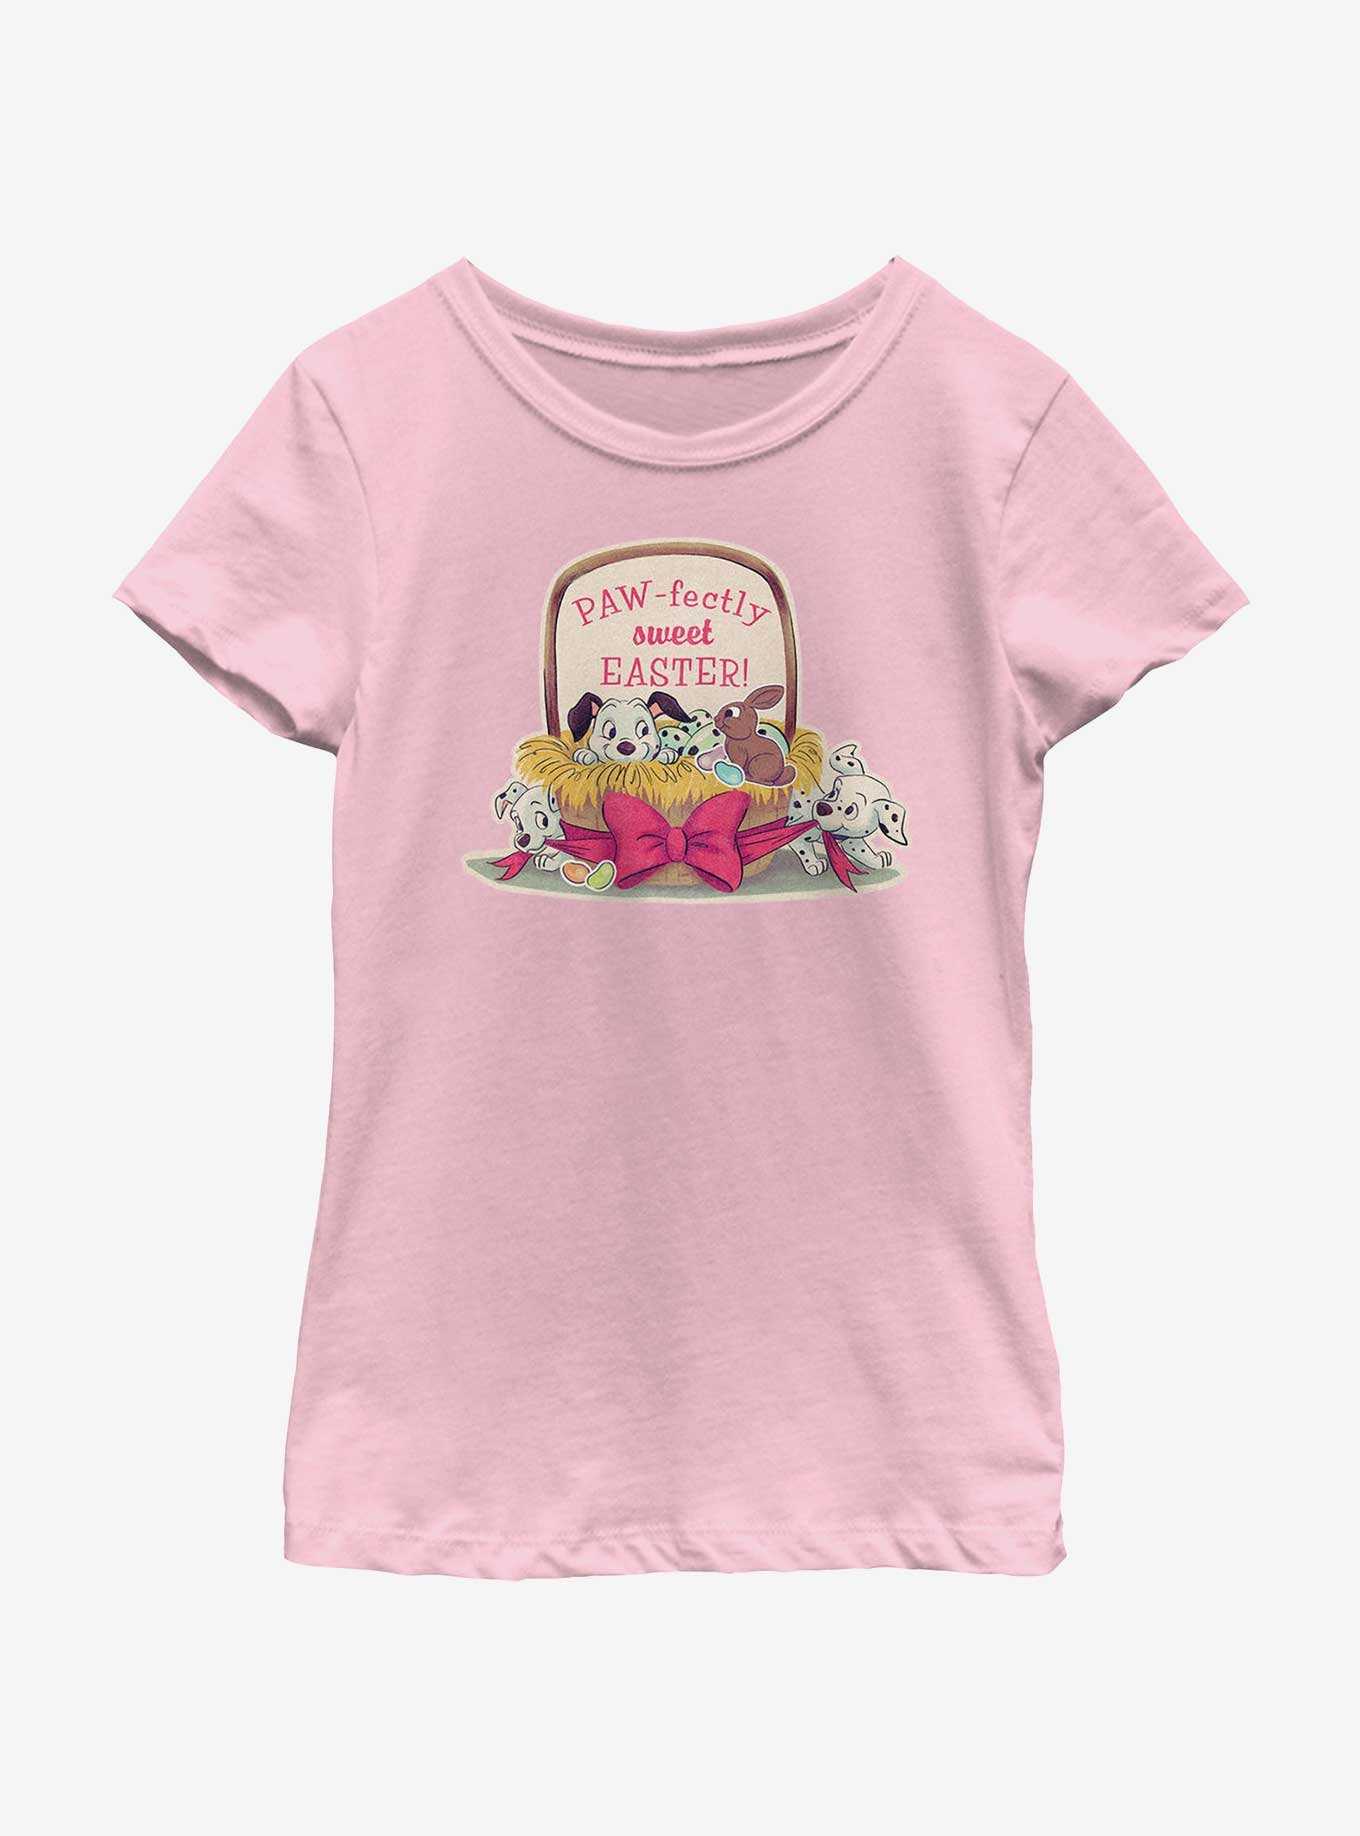 Disney 101 Dalmatians Paw-Fectly Sweet Easter Youth Girls T-Shirt, , hi-res